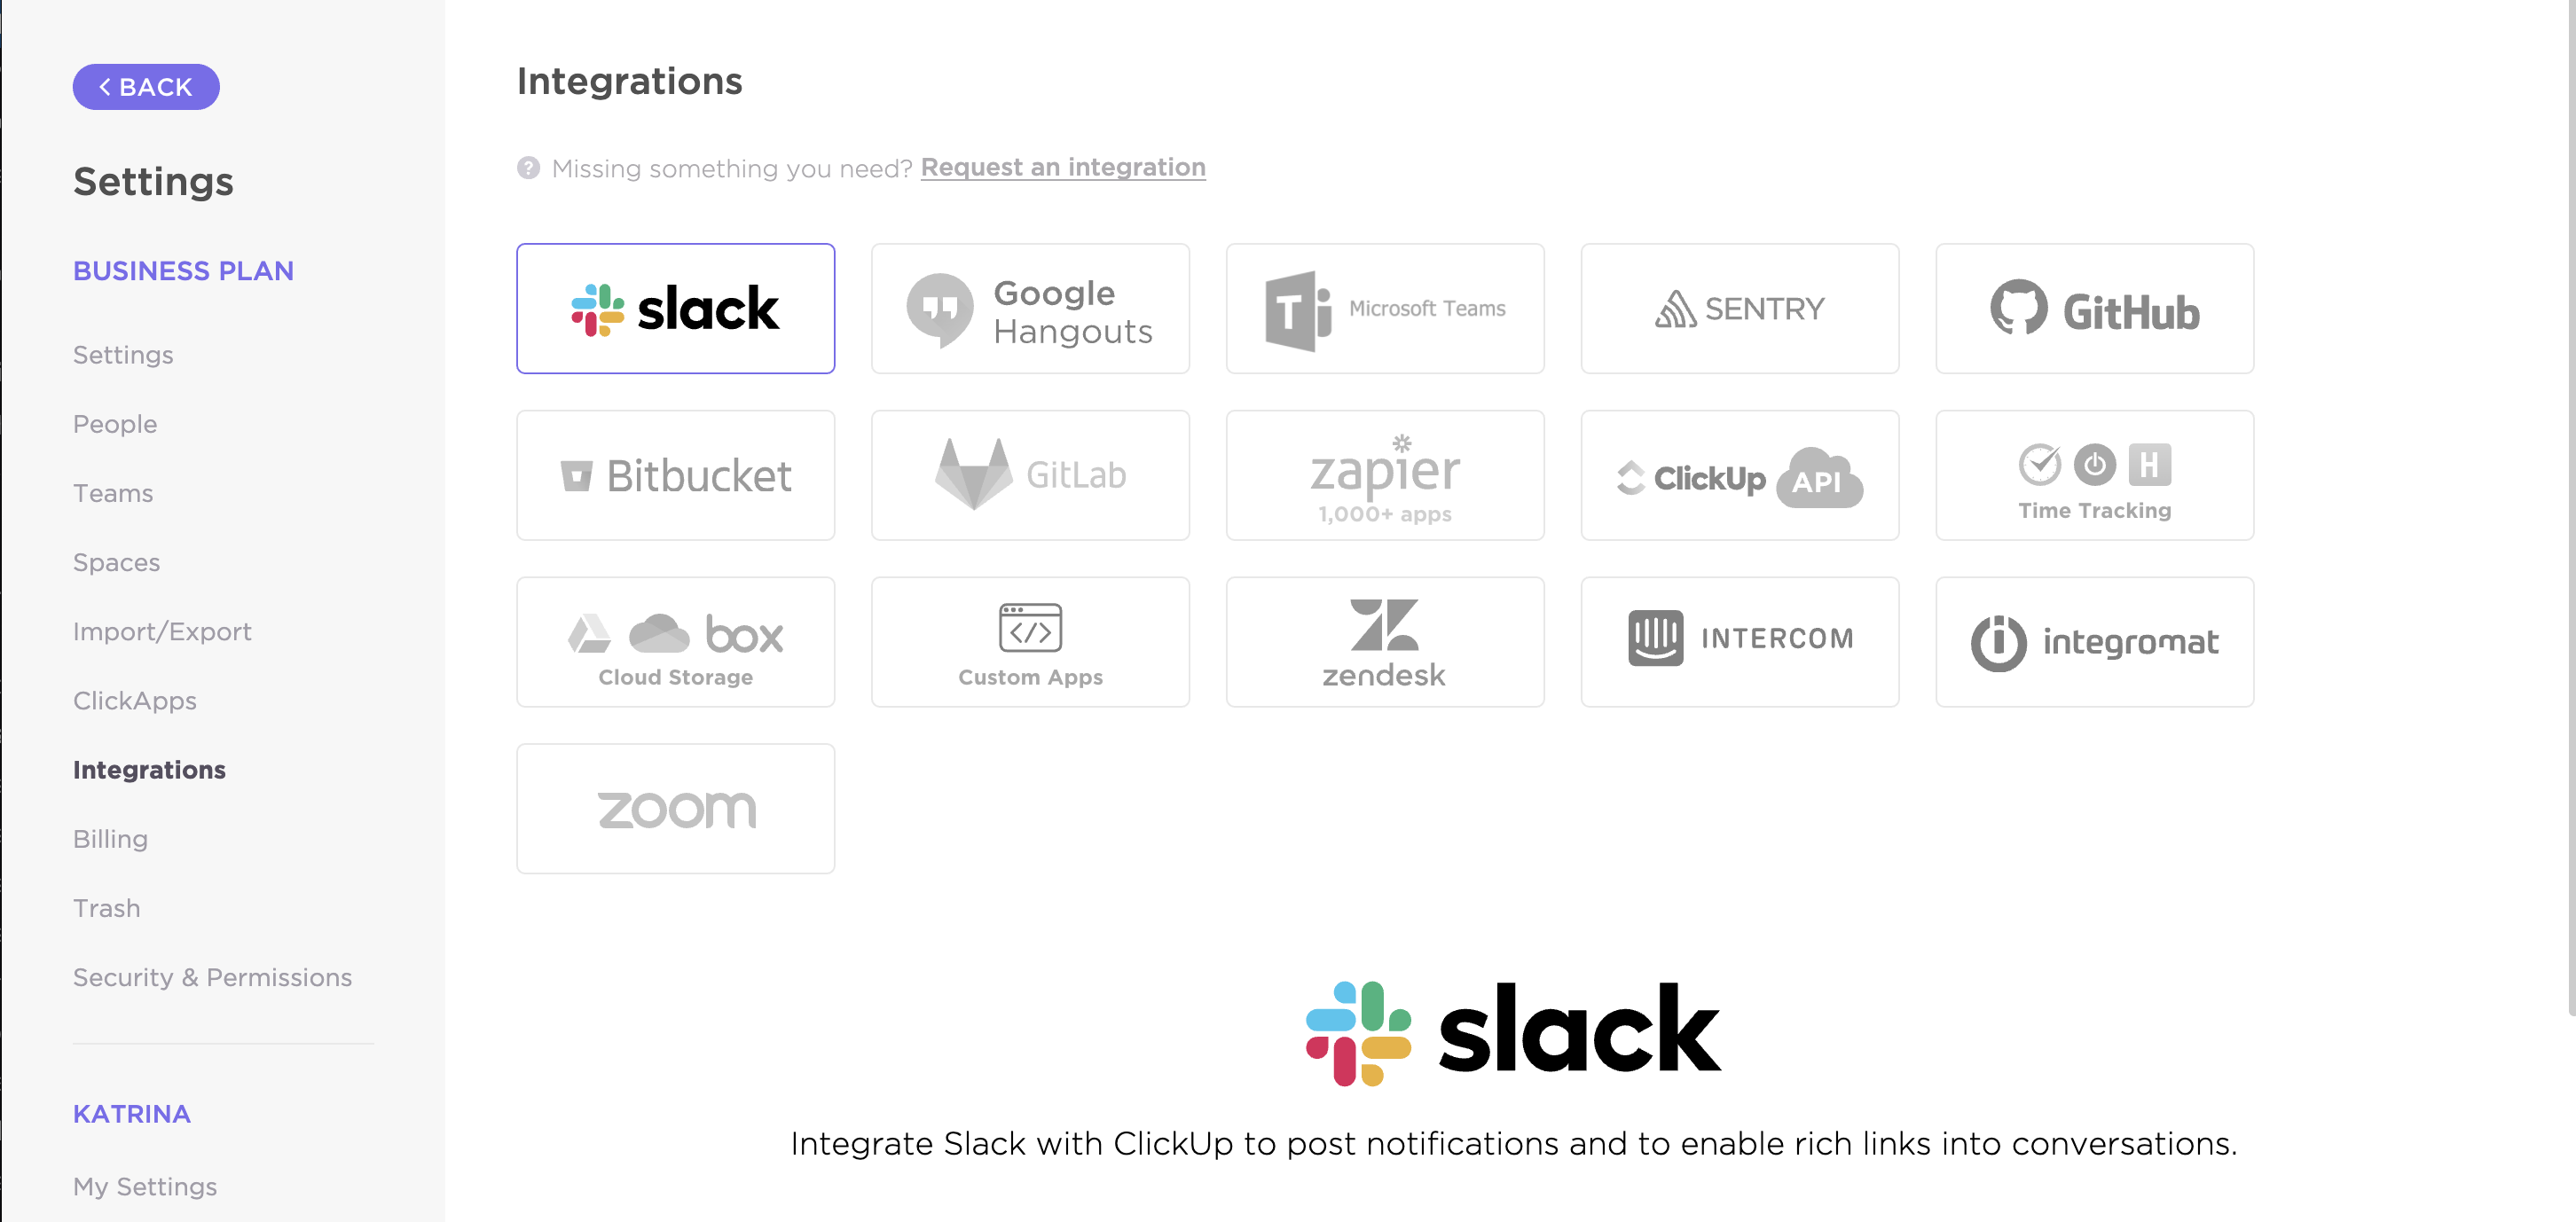 Screenshot showing the Slack integration option in the ClickUp settings.